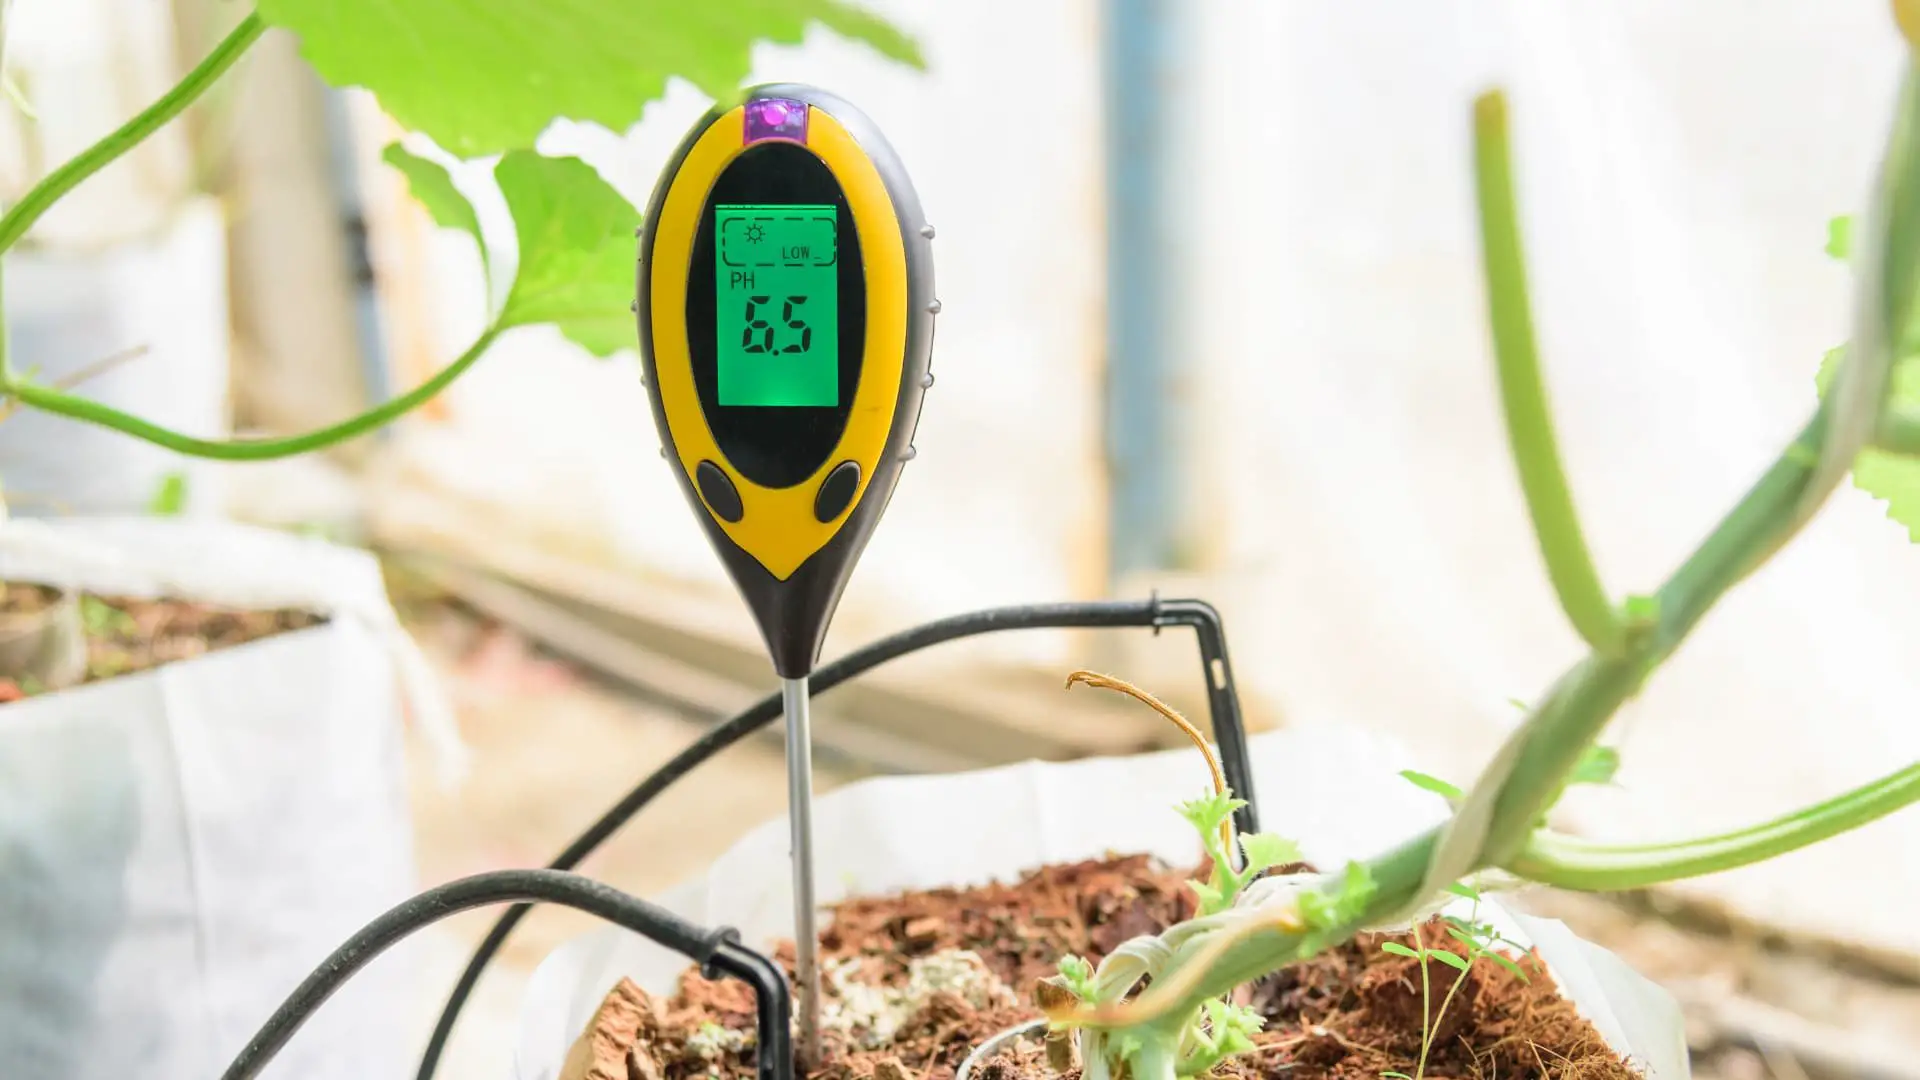 % Find out how to ensure optimum pH levels in each hydroponic growing medium, which is critical for proper nutrient uptake and why does it matters?